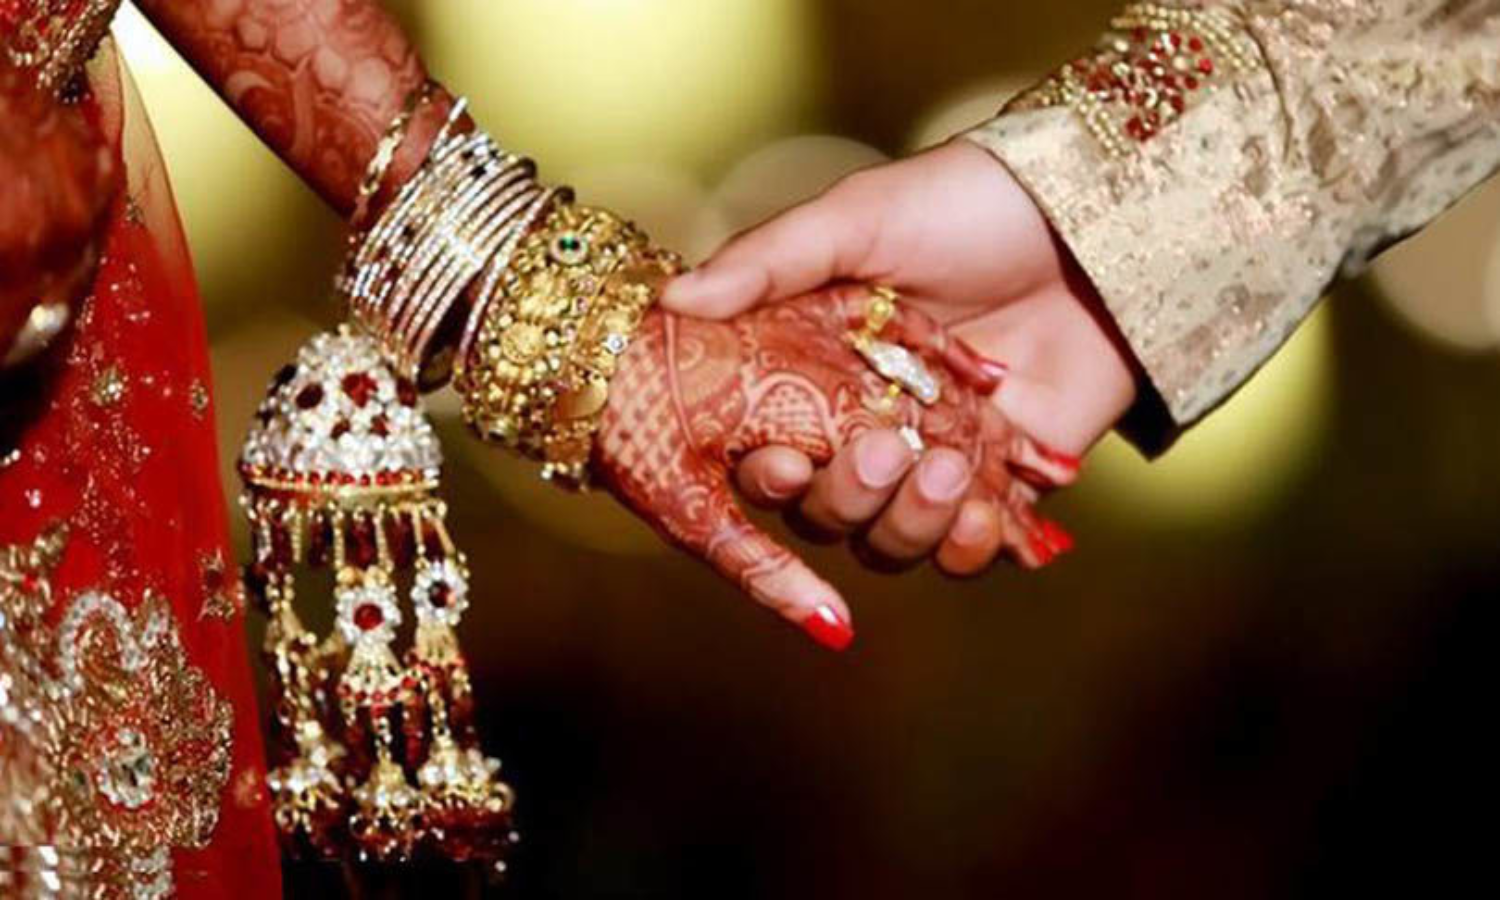 Muslim woman who did not convert to Hinduism before marrying a Hindu man, the marriage is not valid, although the couple is in a live-in relationship.